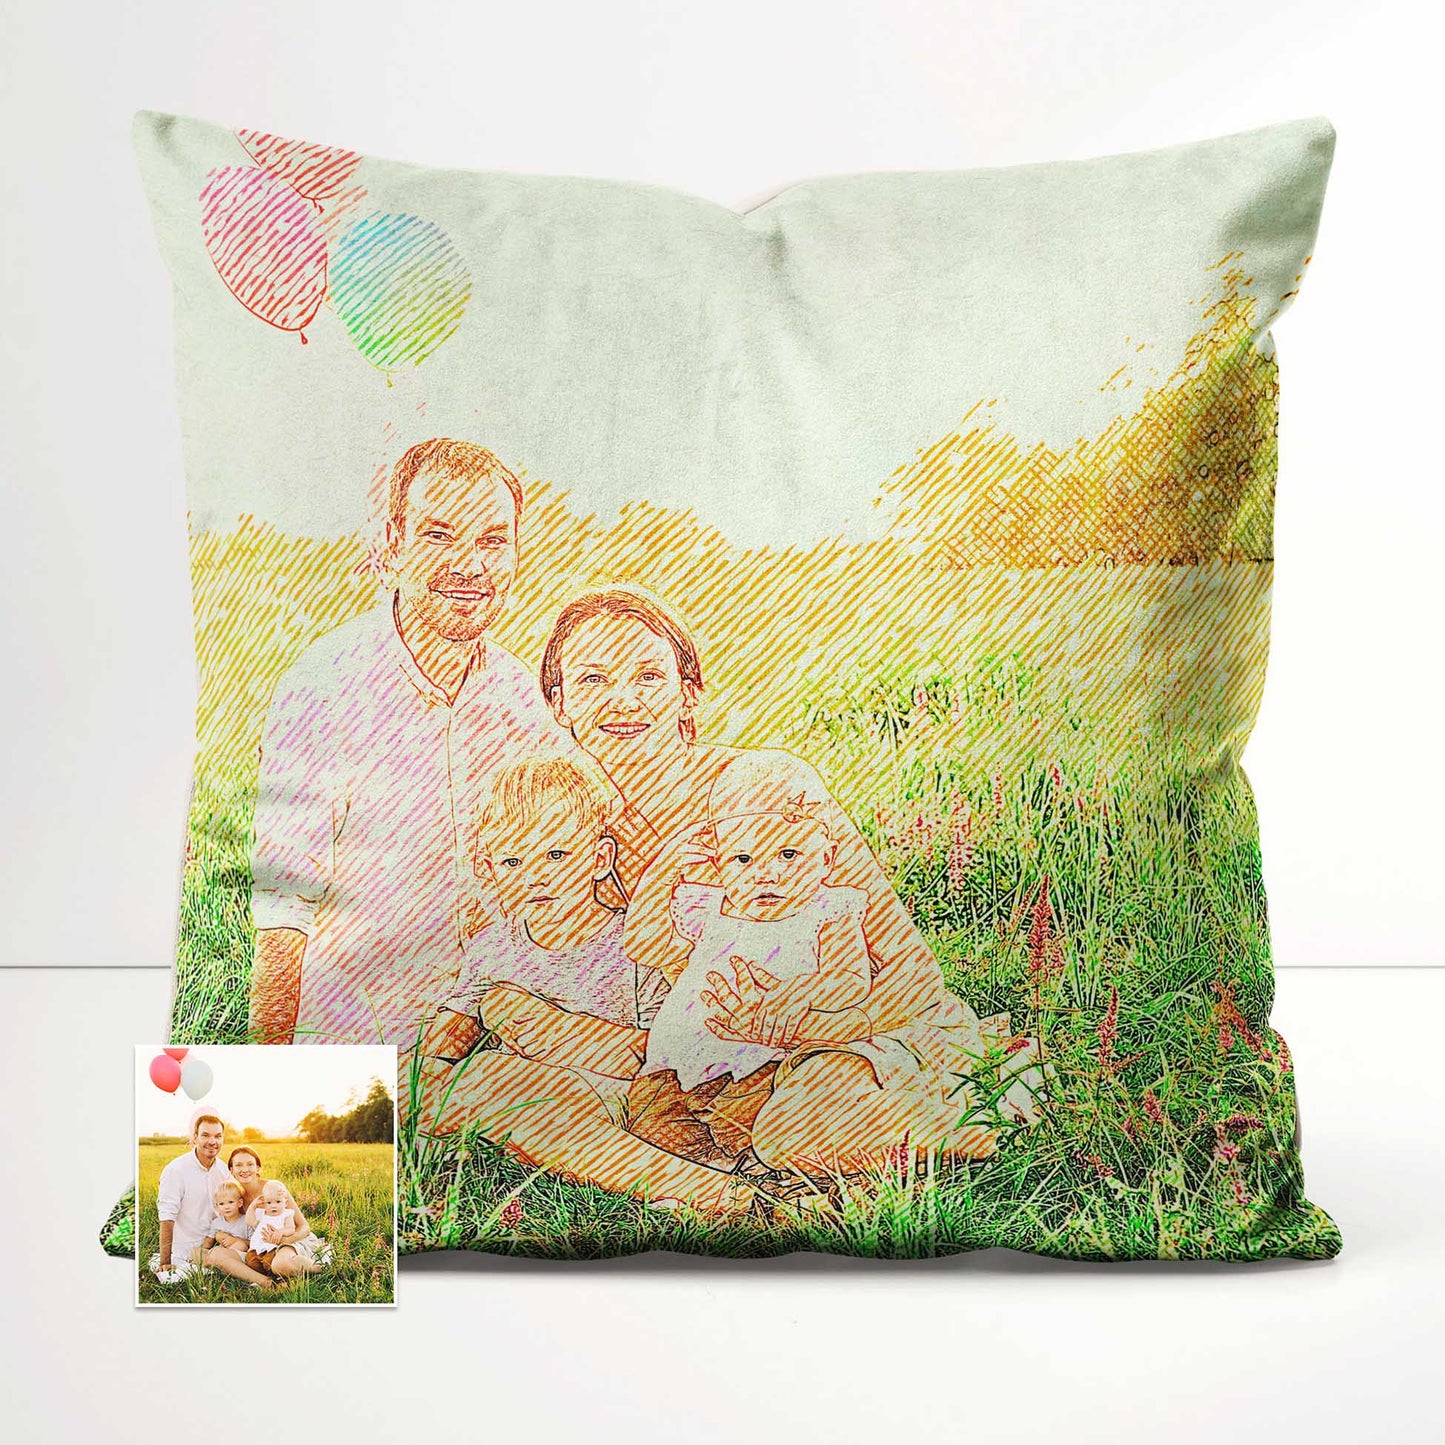 Elevate your home decor with the Personalised Drawing Crosshatch Cushion, a masterpiece of original design. This luxury cushion showcases a stunning digital art-inspired pattern that brings a trendy and hip vibe to your space